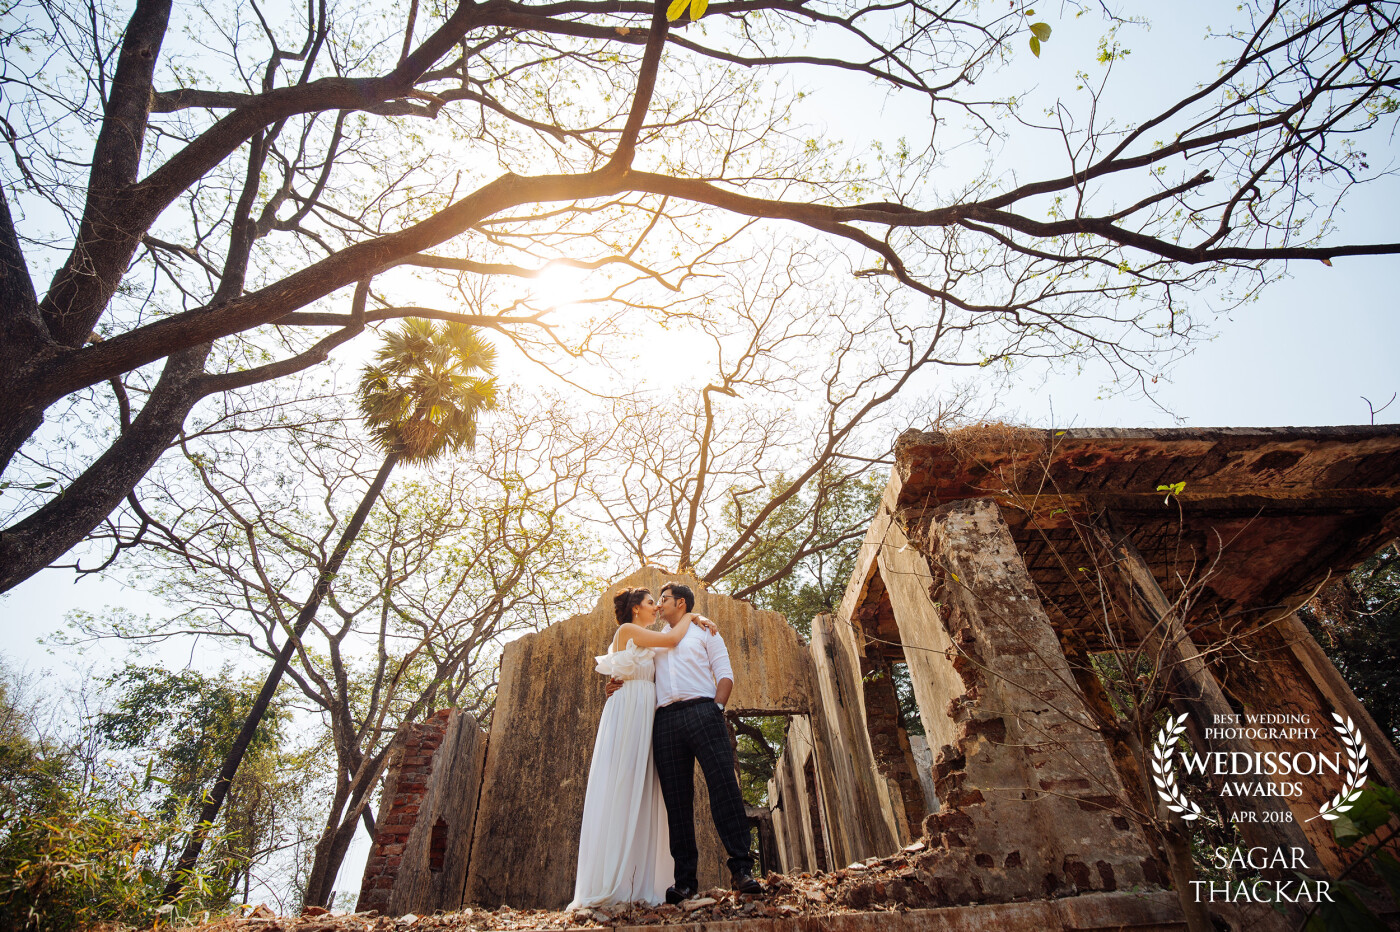 The couple were very close to the nature and wanted something with similar feel, we found this location in middle of a concrete jungle in Mumbai. <br />
This is one of our most favorite pictures.  